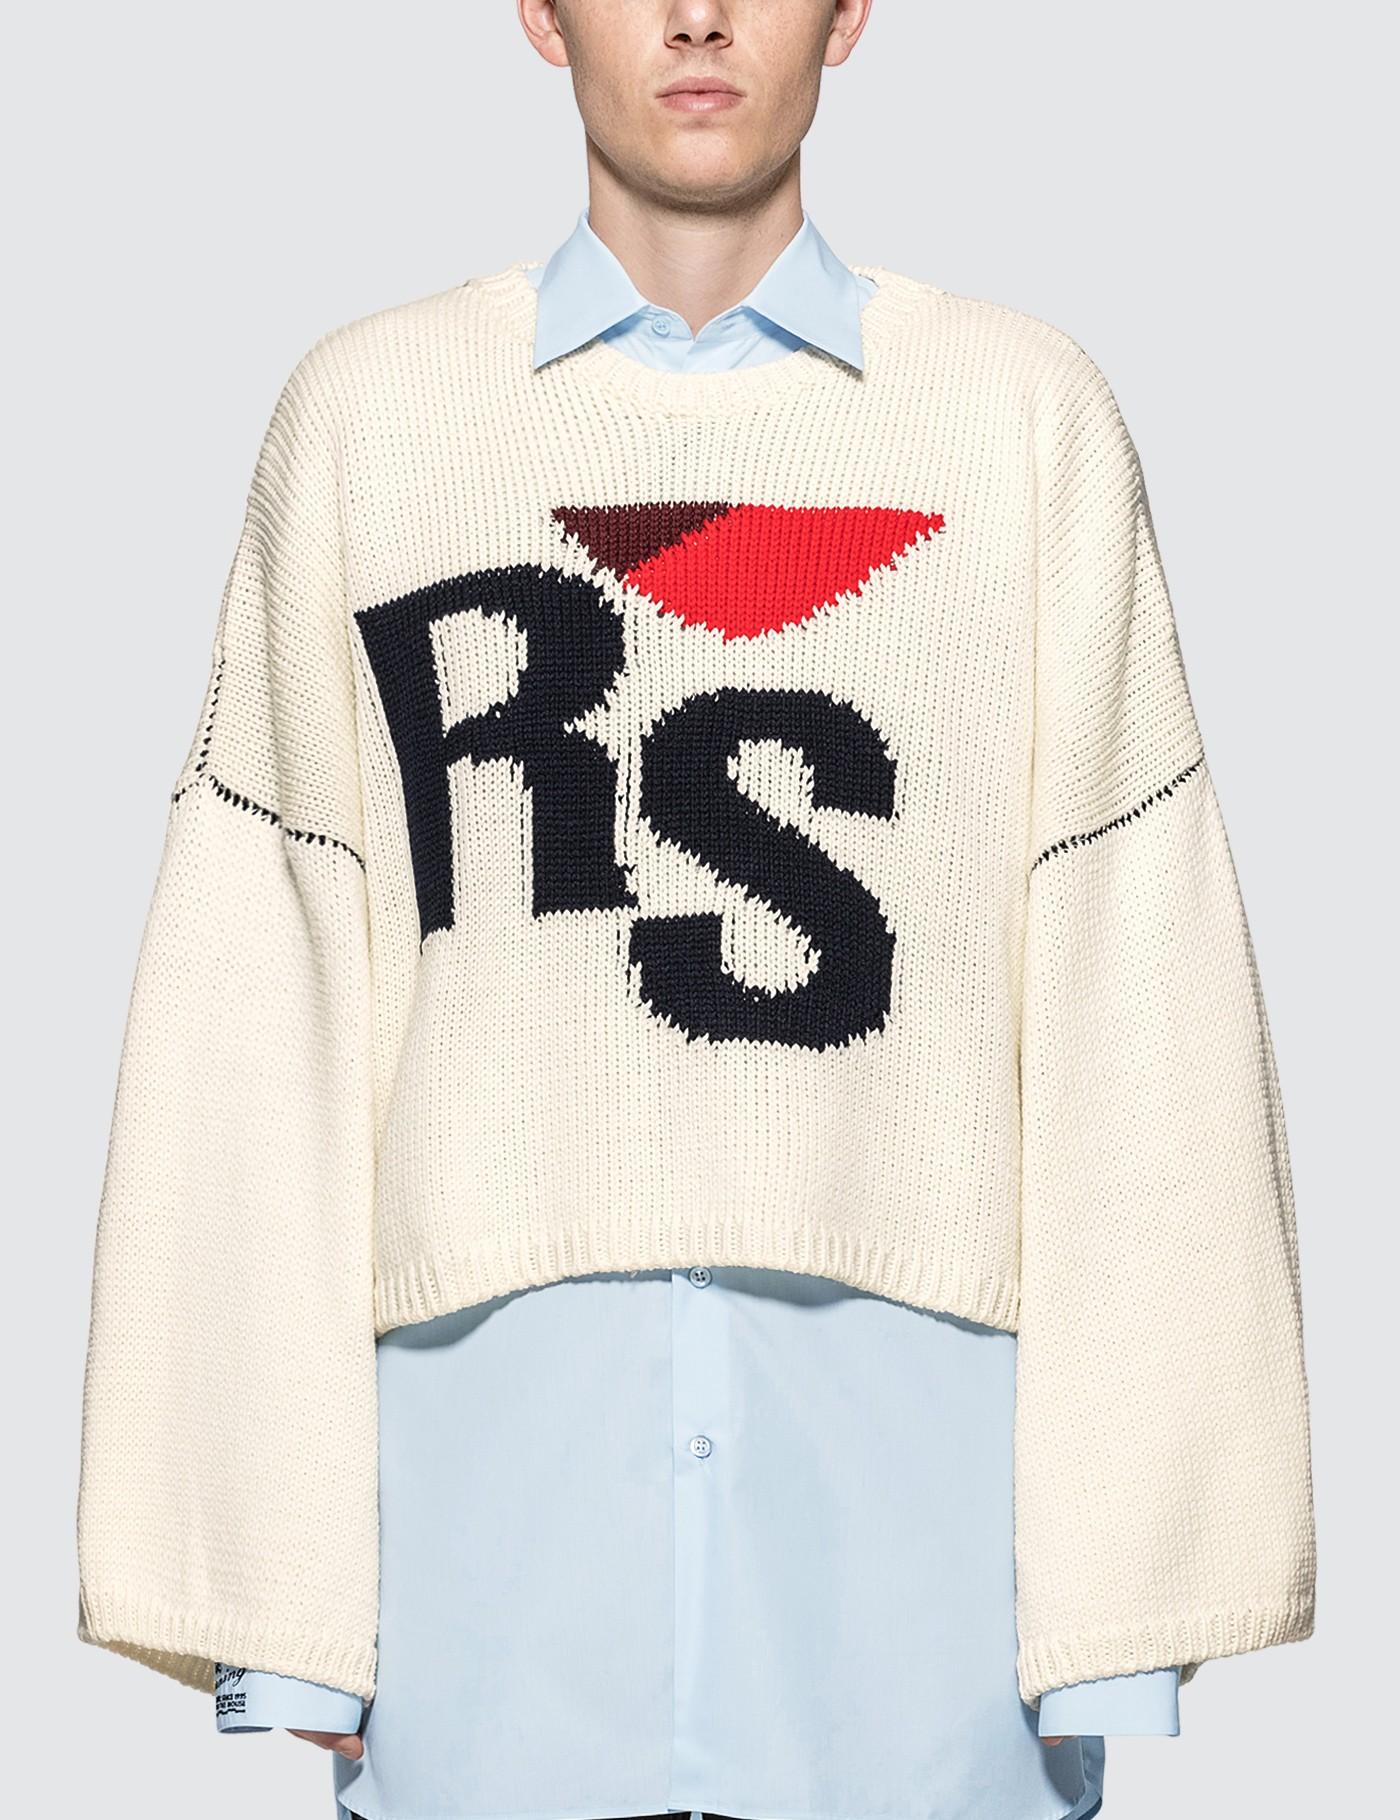 Raf Simons Wool Cropped Rs Sweater in White for Men - Lyst